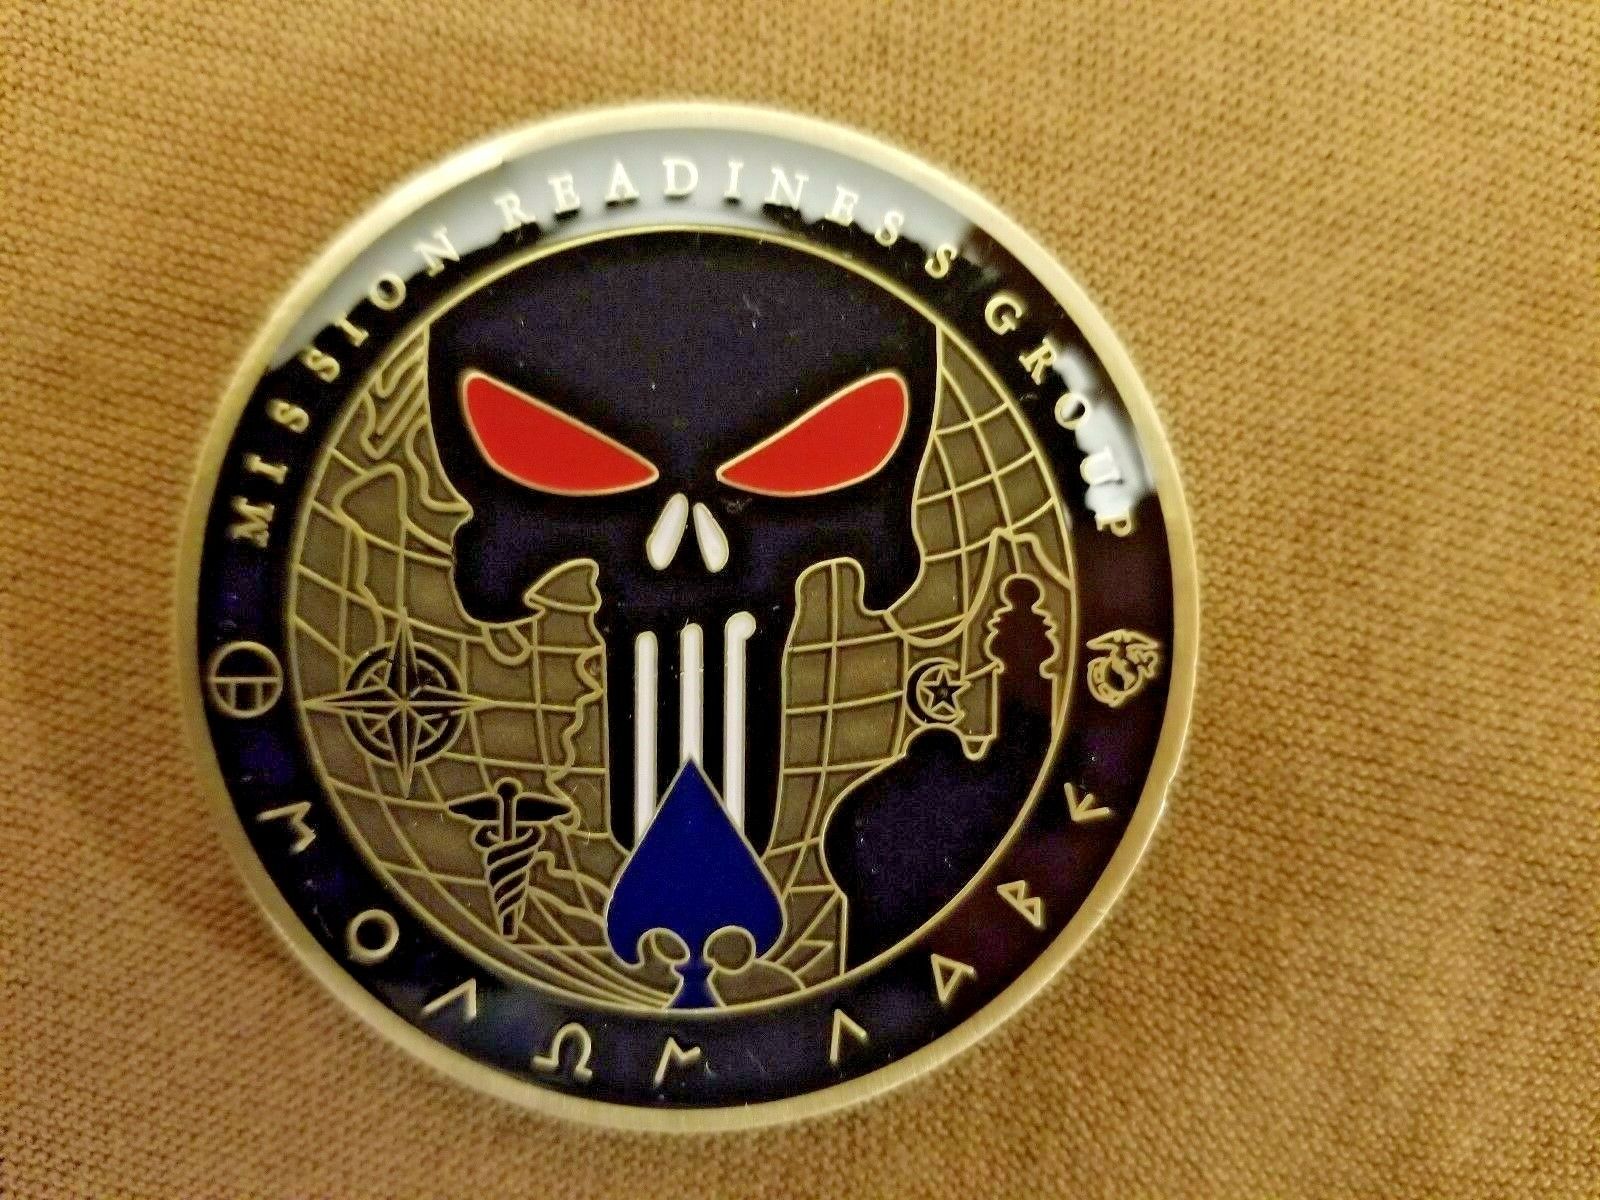  CIA ,CTC,  MISSION READINESS GROUP , ANKARRA STATION , TURKEY  CHALLENGE COIN